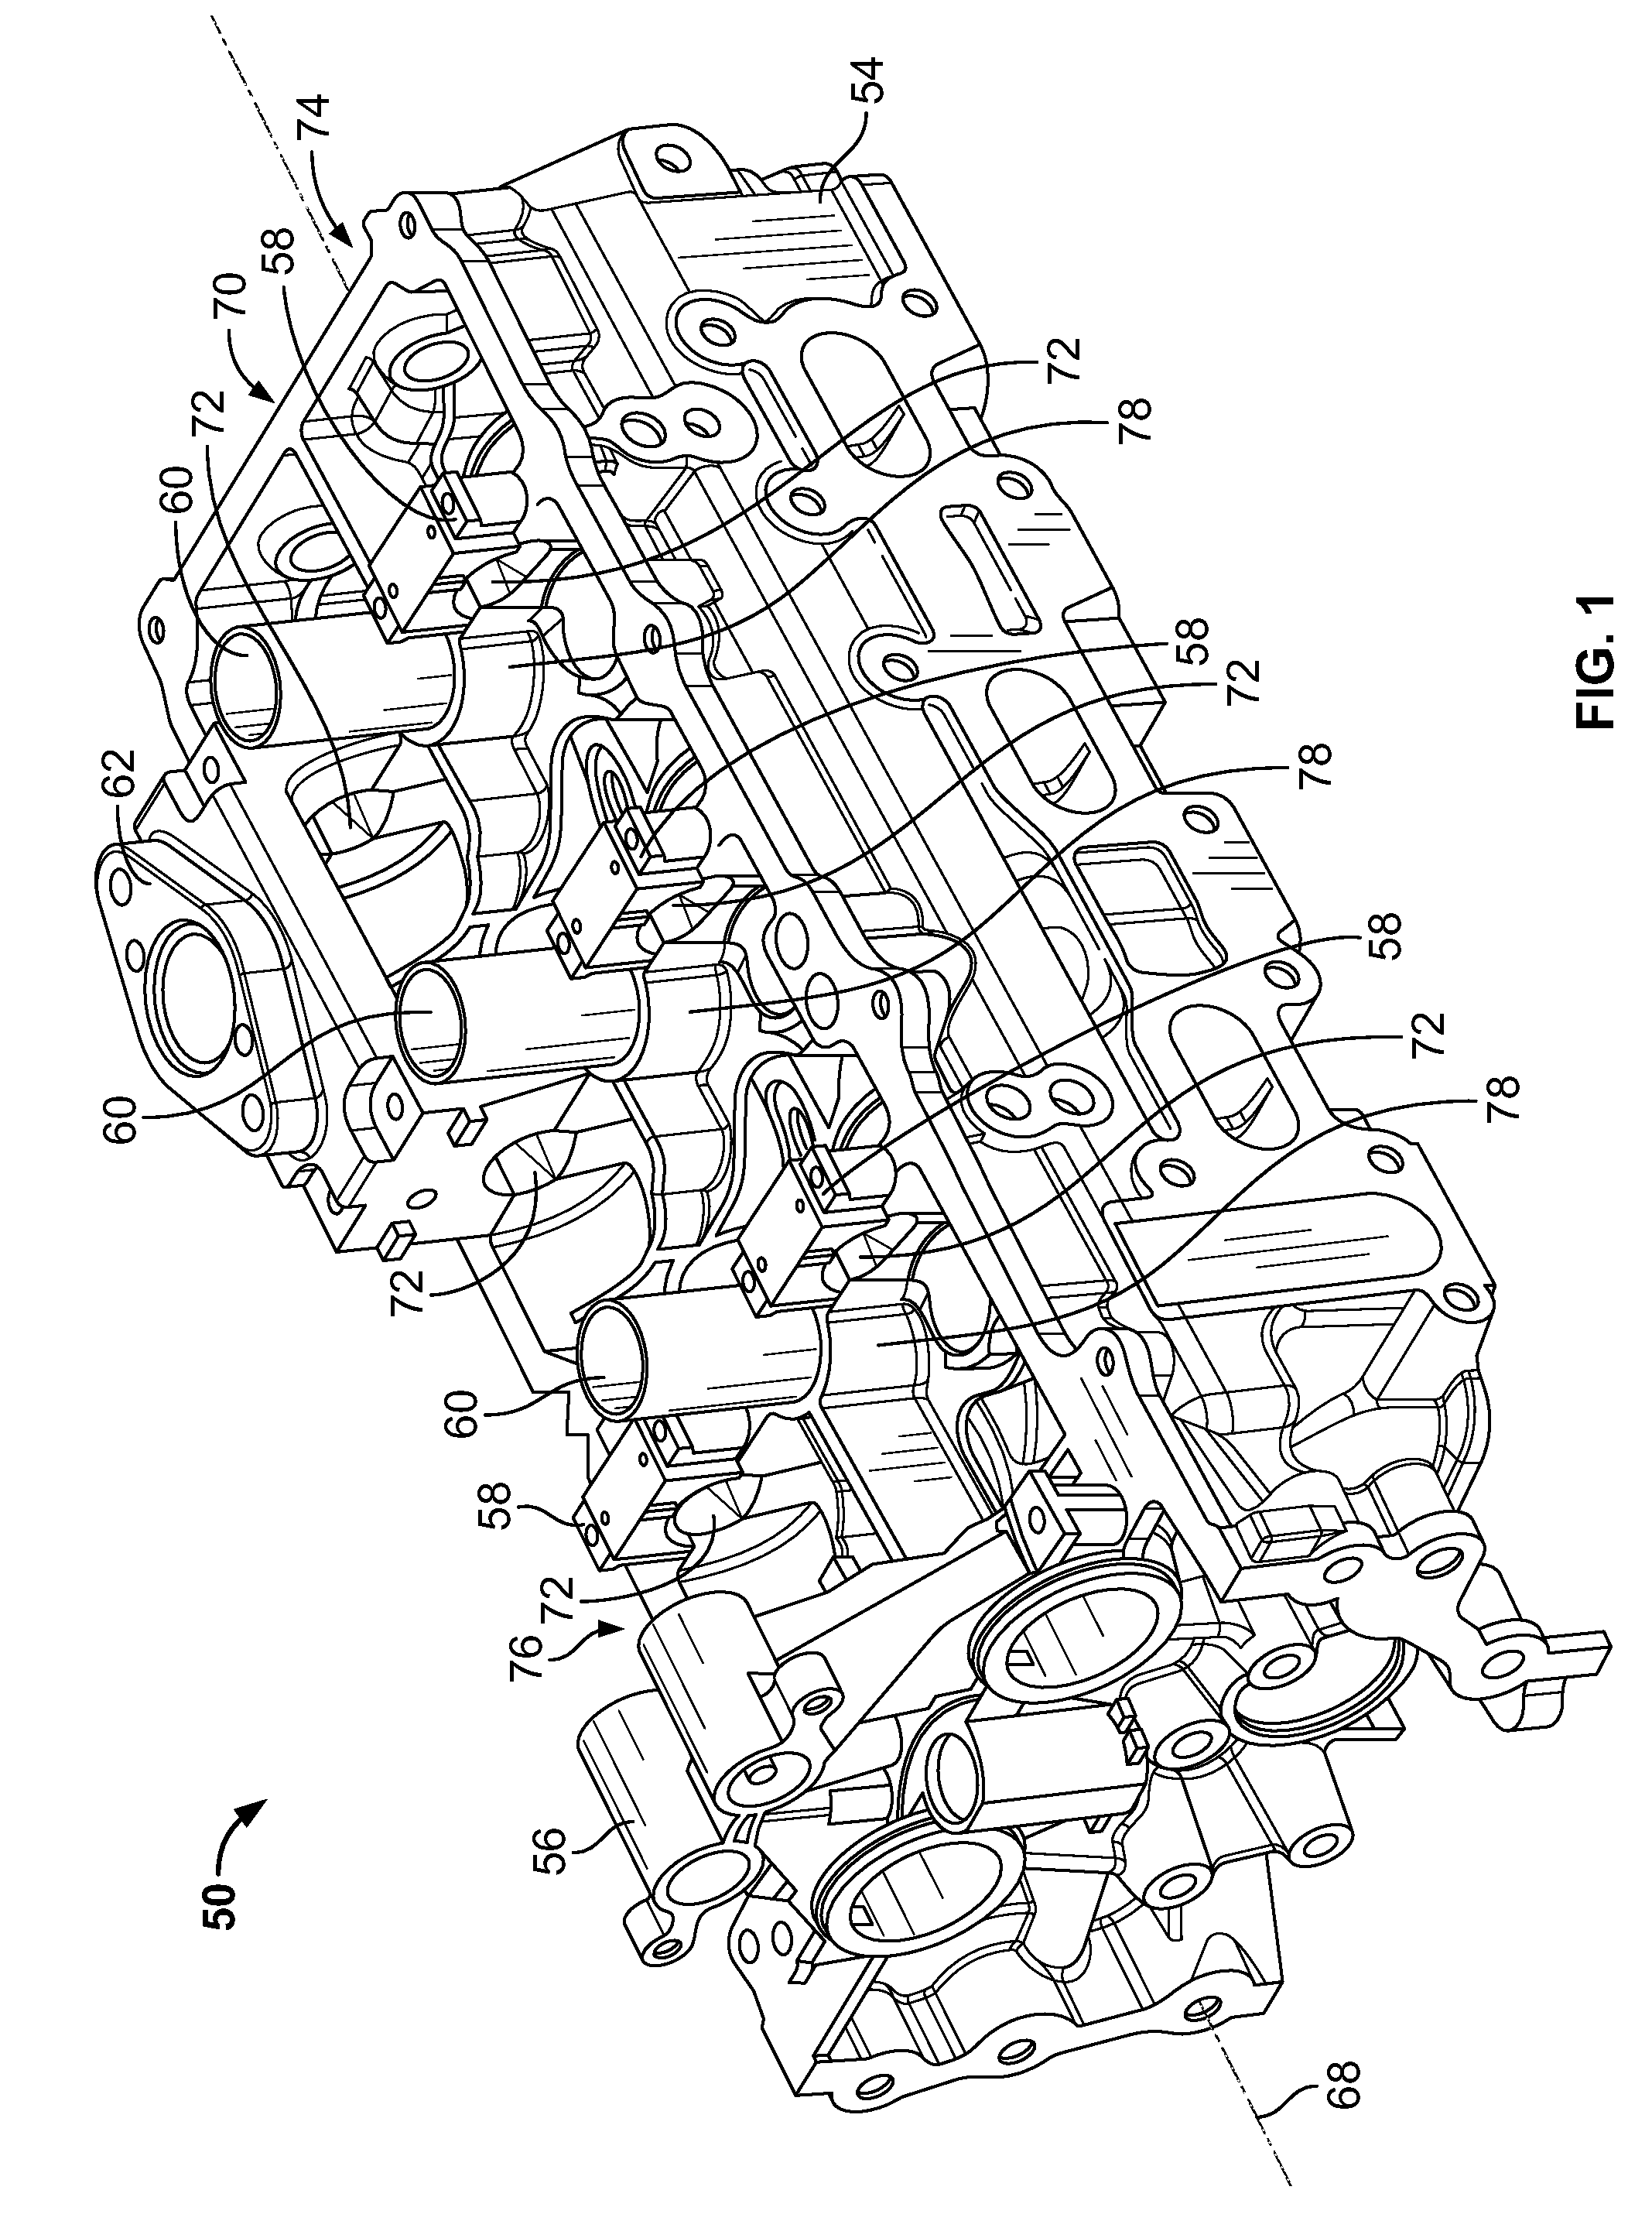 Upper cylinder head housing for use with an engine and method of making the same